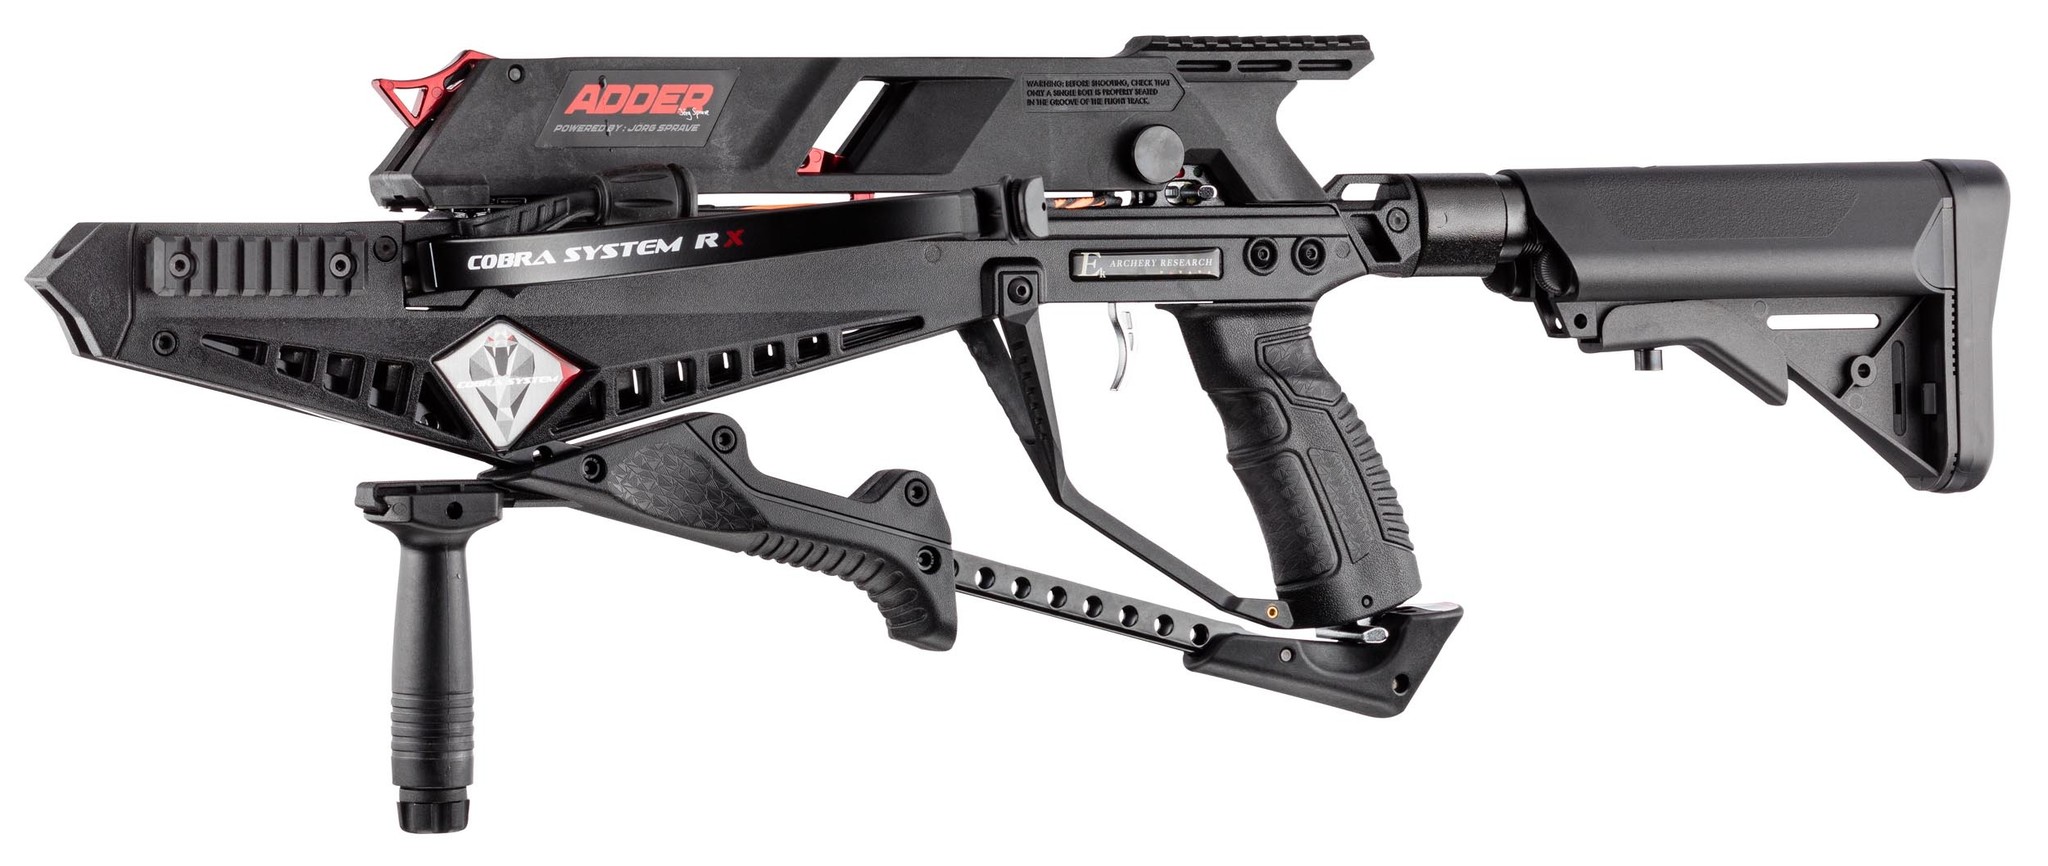 cobra rx adder tactical repeating crossbow price